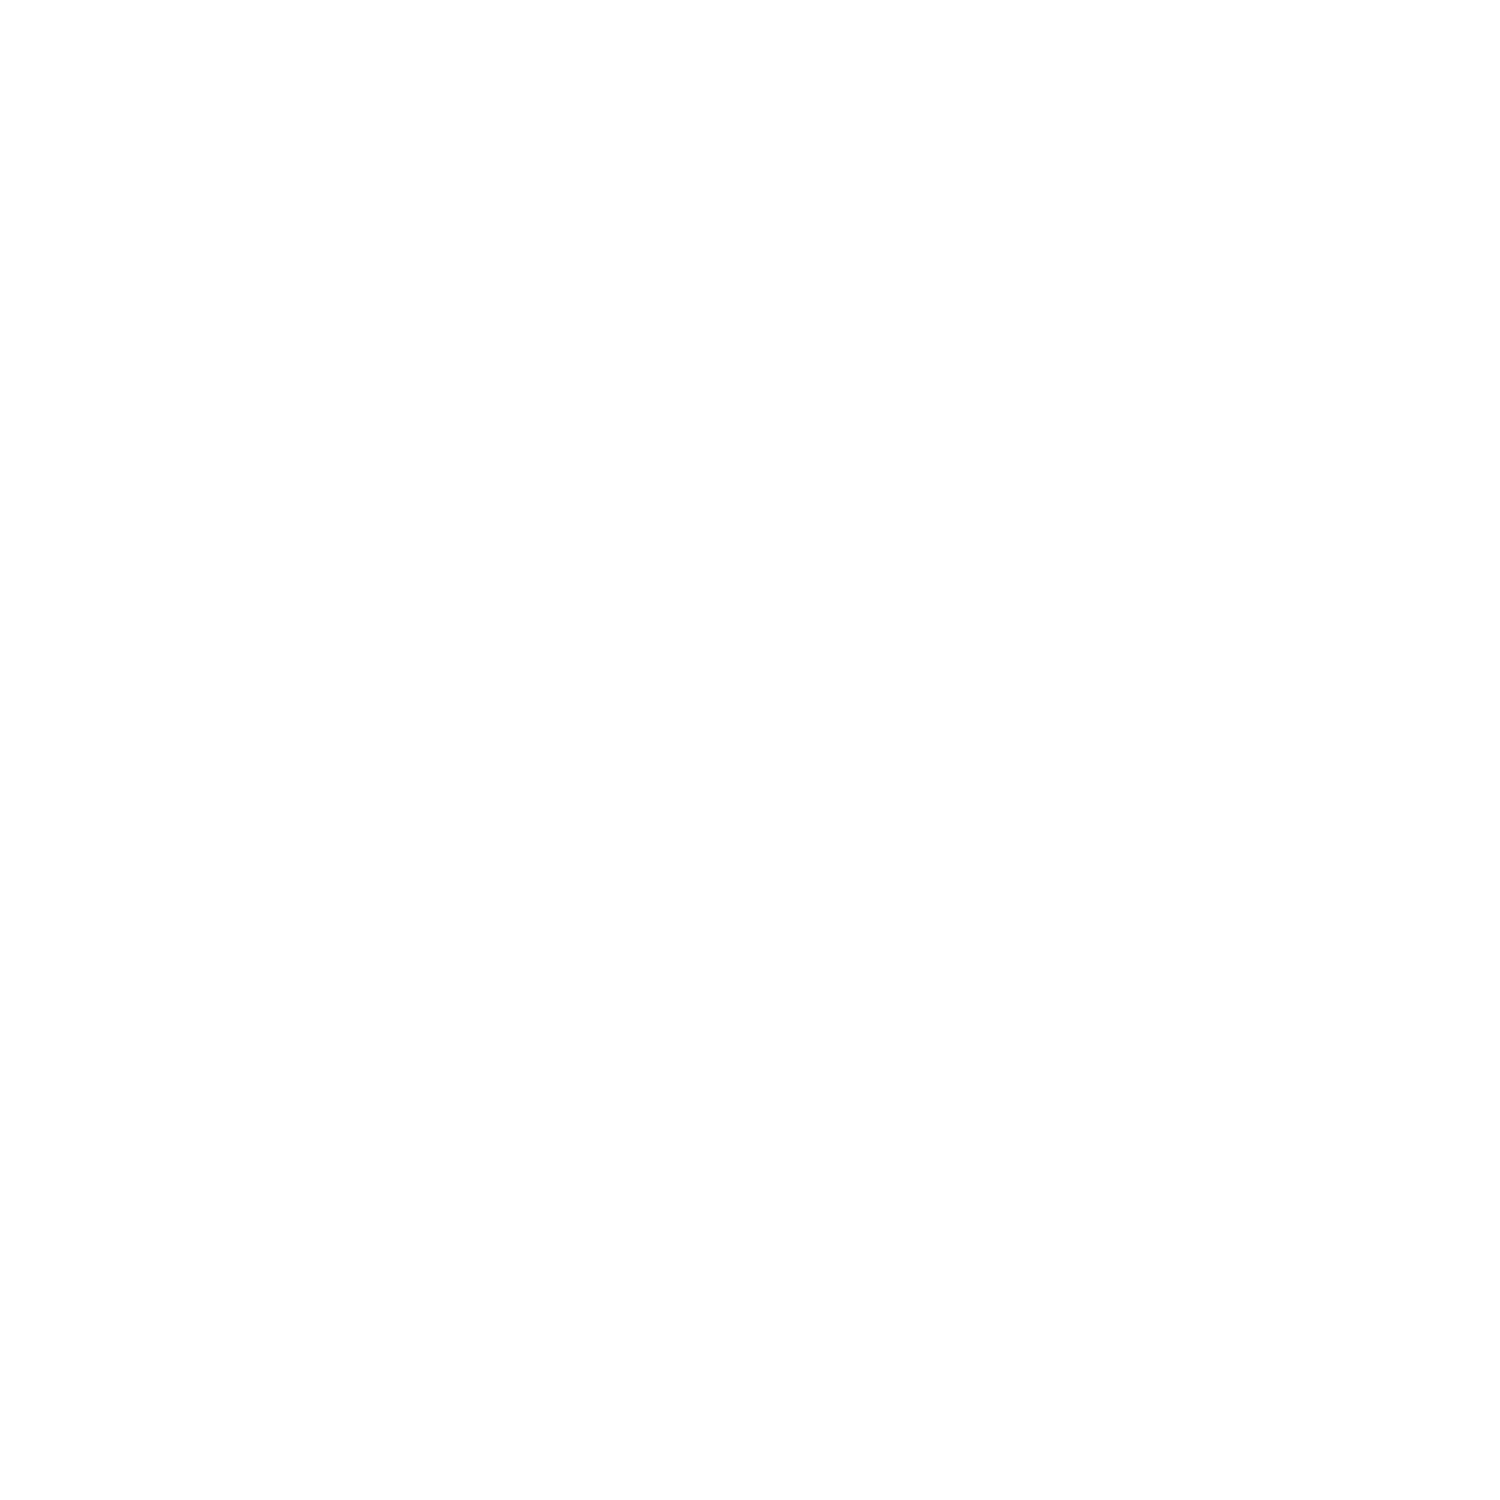 endless-01.png